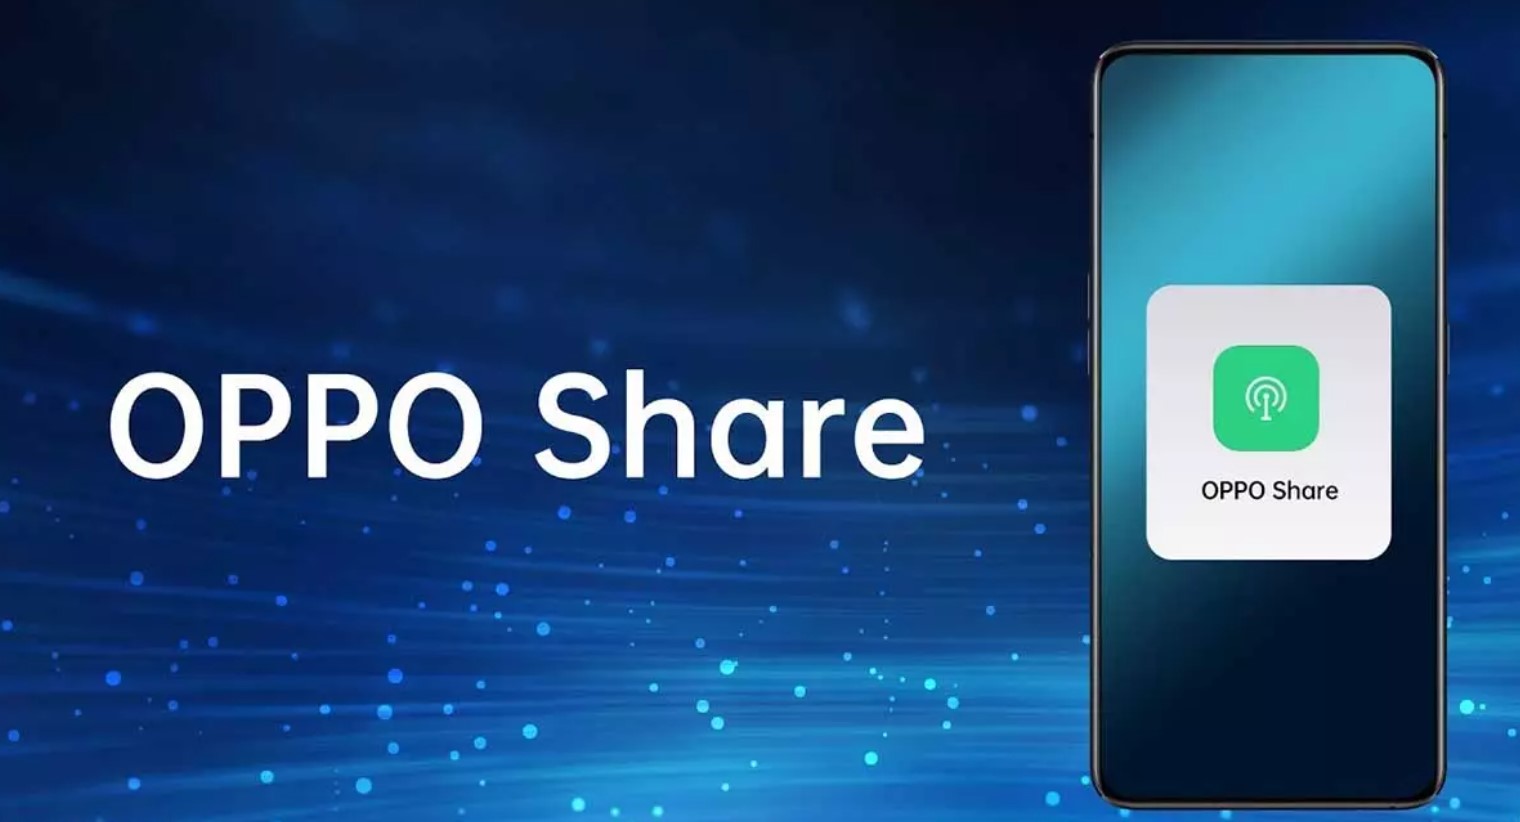 WHAT IS OPPO SHARE